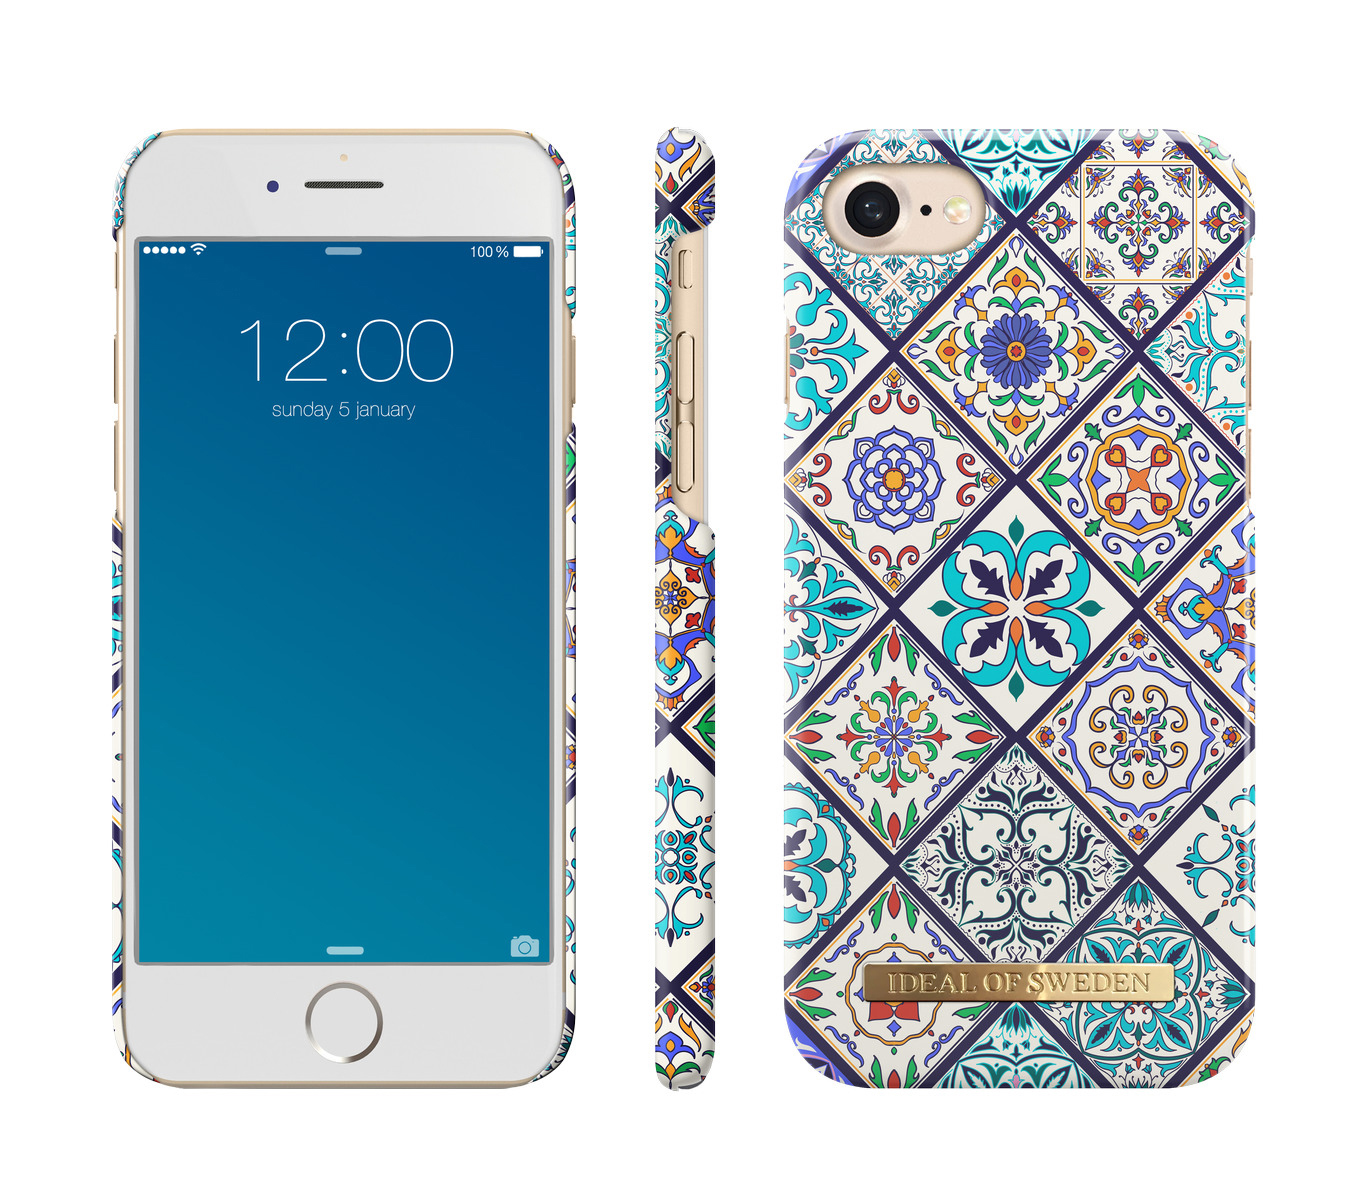 6, Mosaic SWEDEN Apple, Backcover, 7, iPhone IDEAL iPhone iPhone OF 8, Fashion,